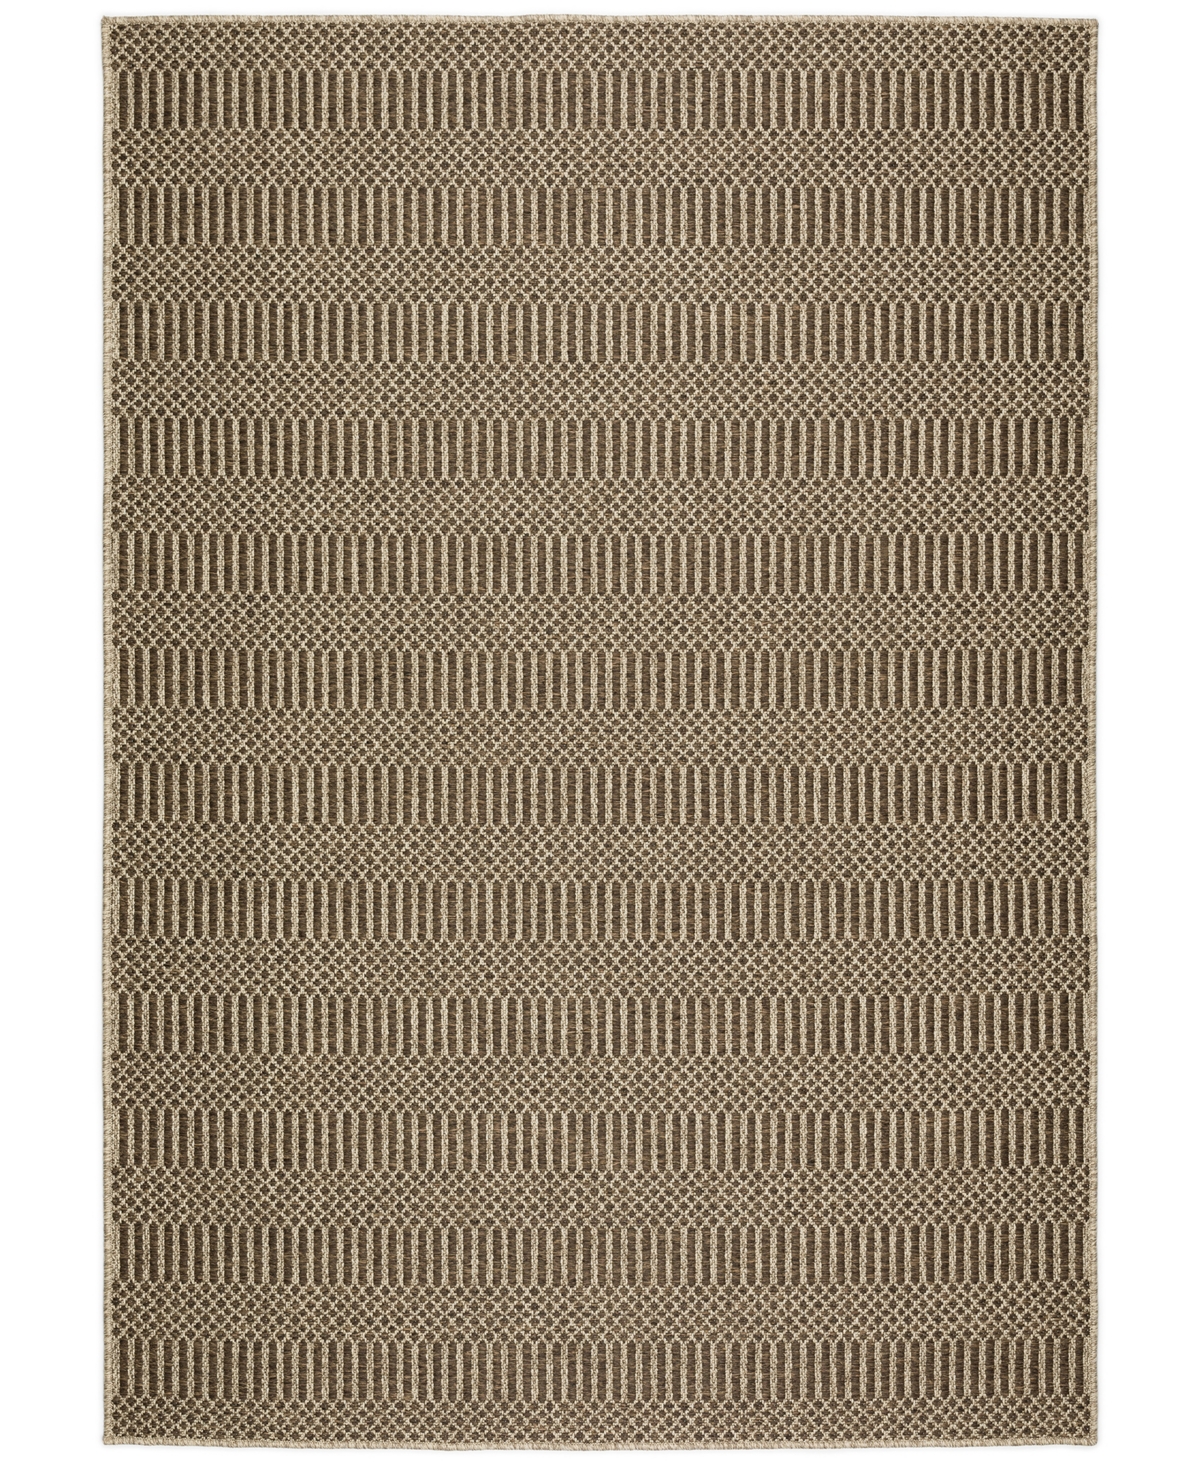 Shop D Style Nusa Outdoor Nsa4 8' X 10' Area Rug In Chocolate